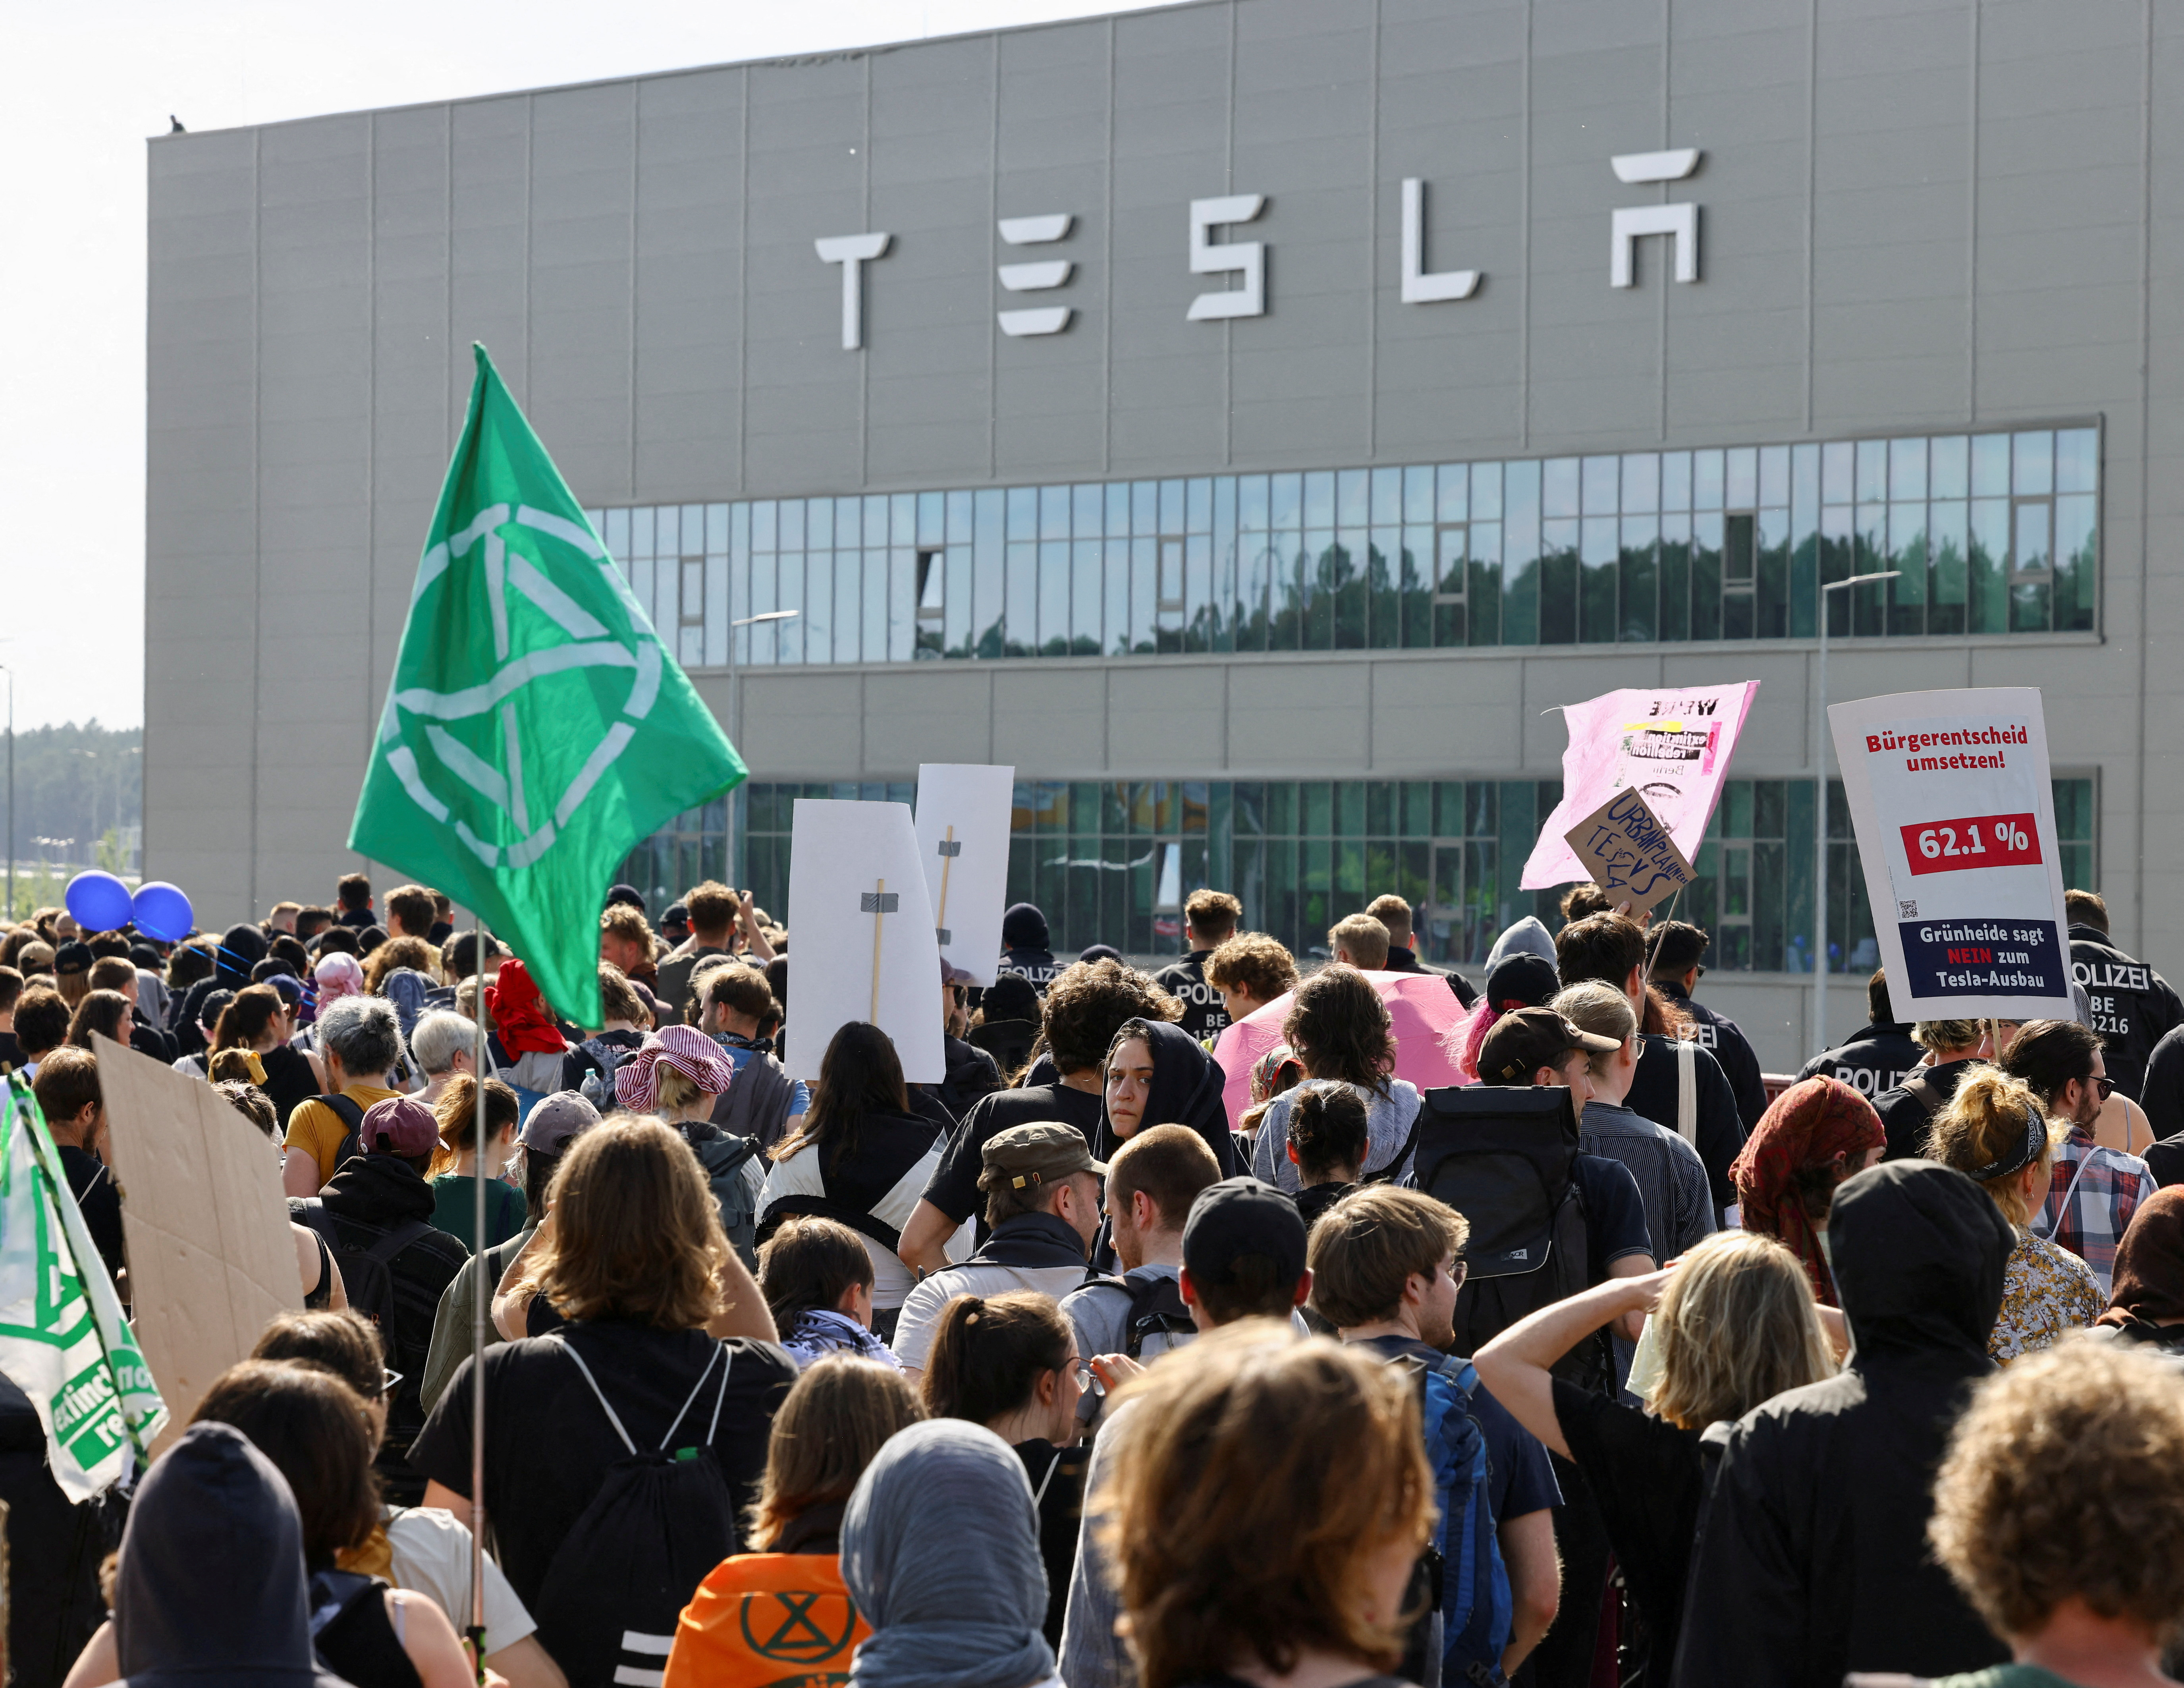 Activists protest against the expansion of the Tesla Gigafactory in Gruenheide, Germany